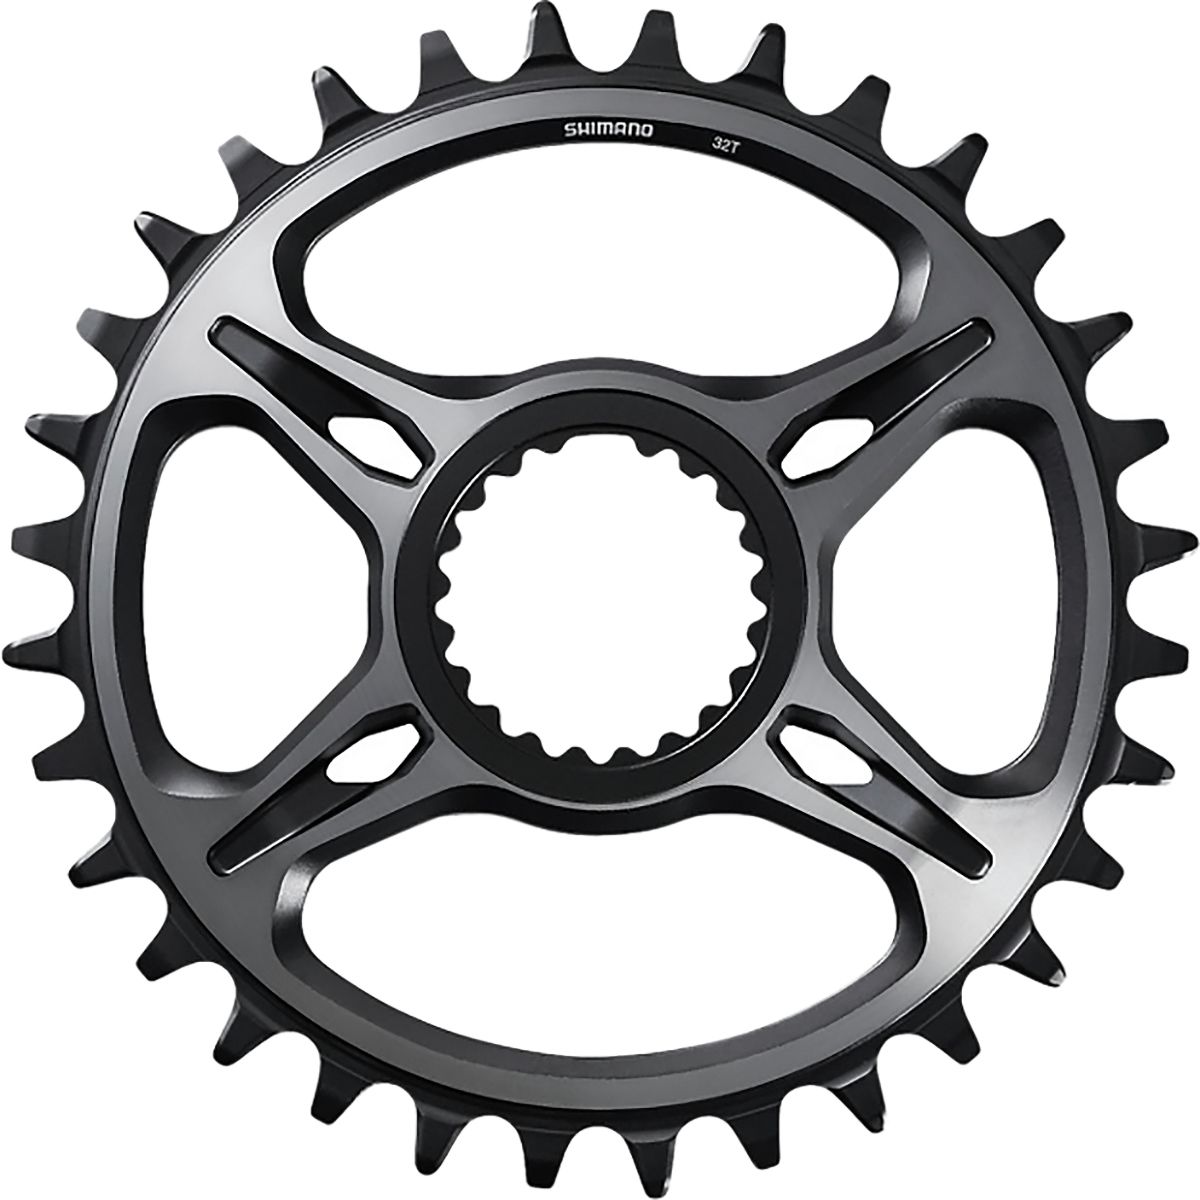 Shimano XTR SM-CRM95 12 Speed Direct Mount Chainring Stealth Grey, 30t, M9100/M9120